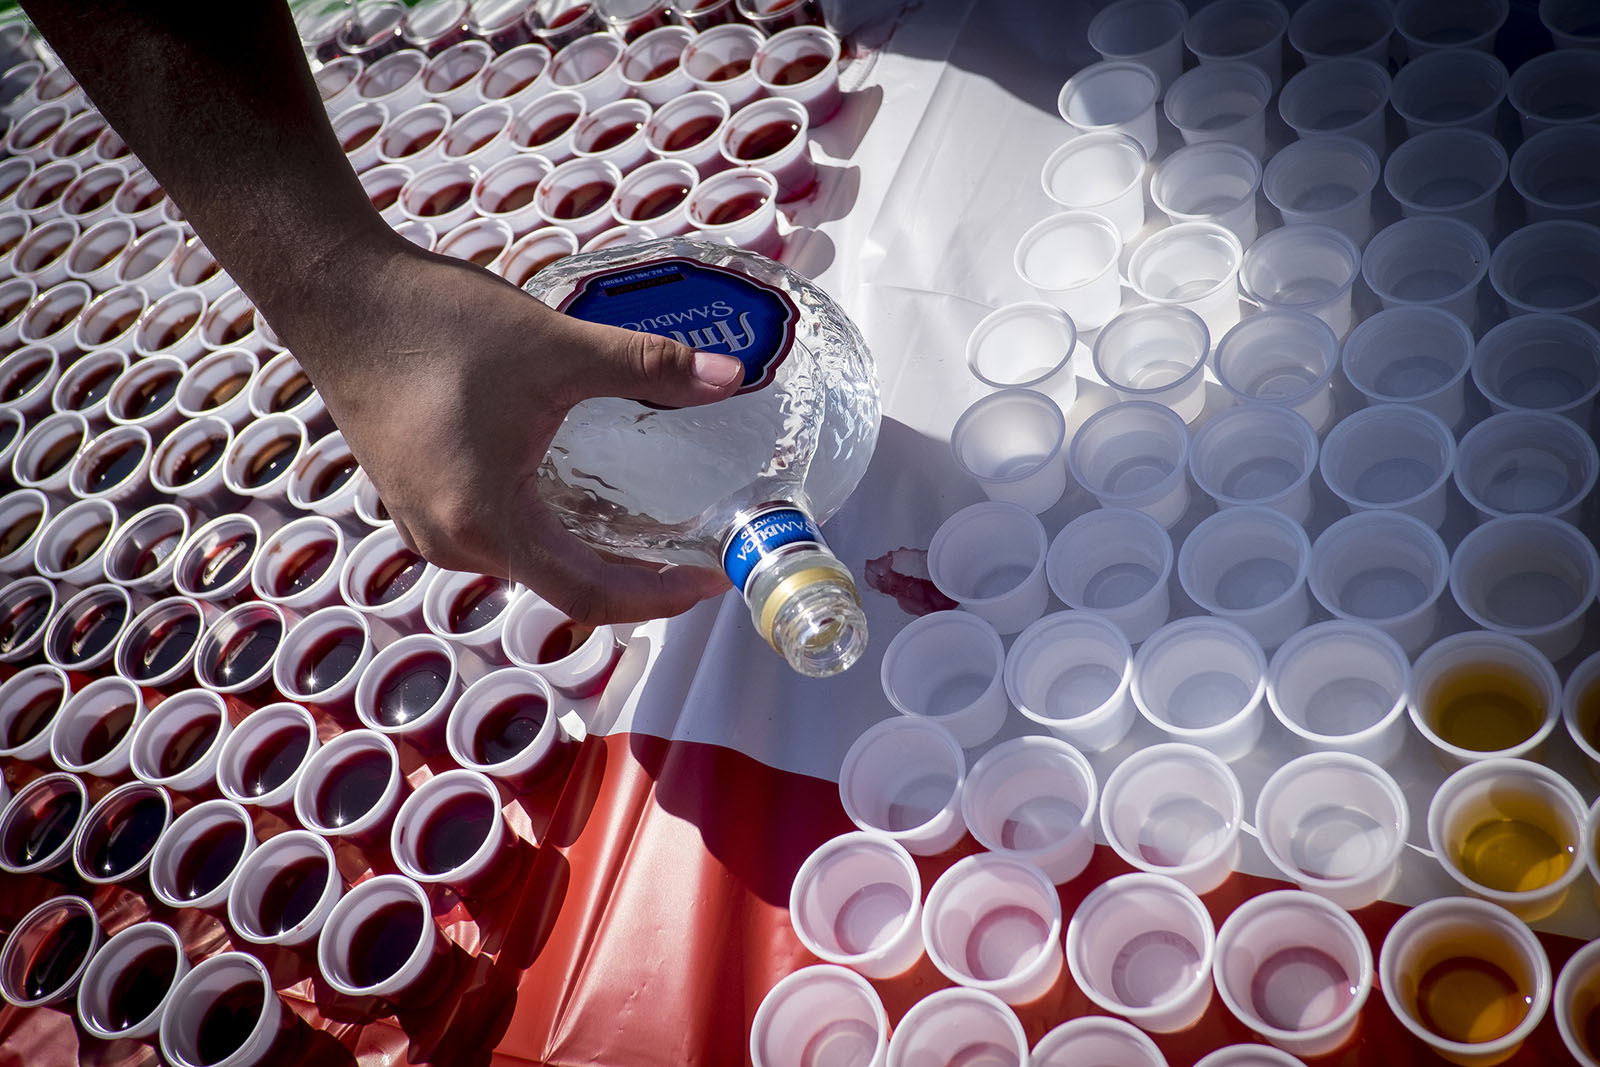 A man pours many shots as part of an Aliquippa festival.